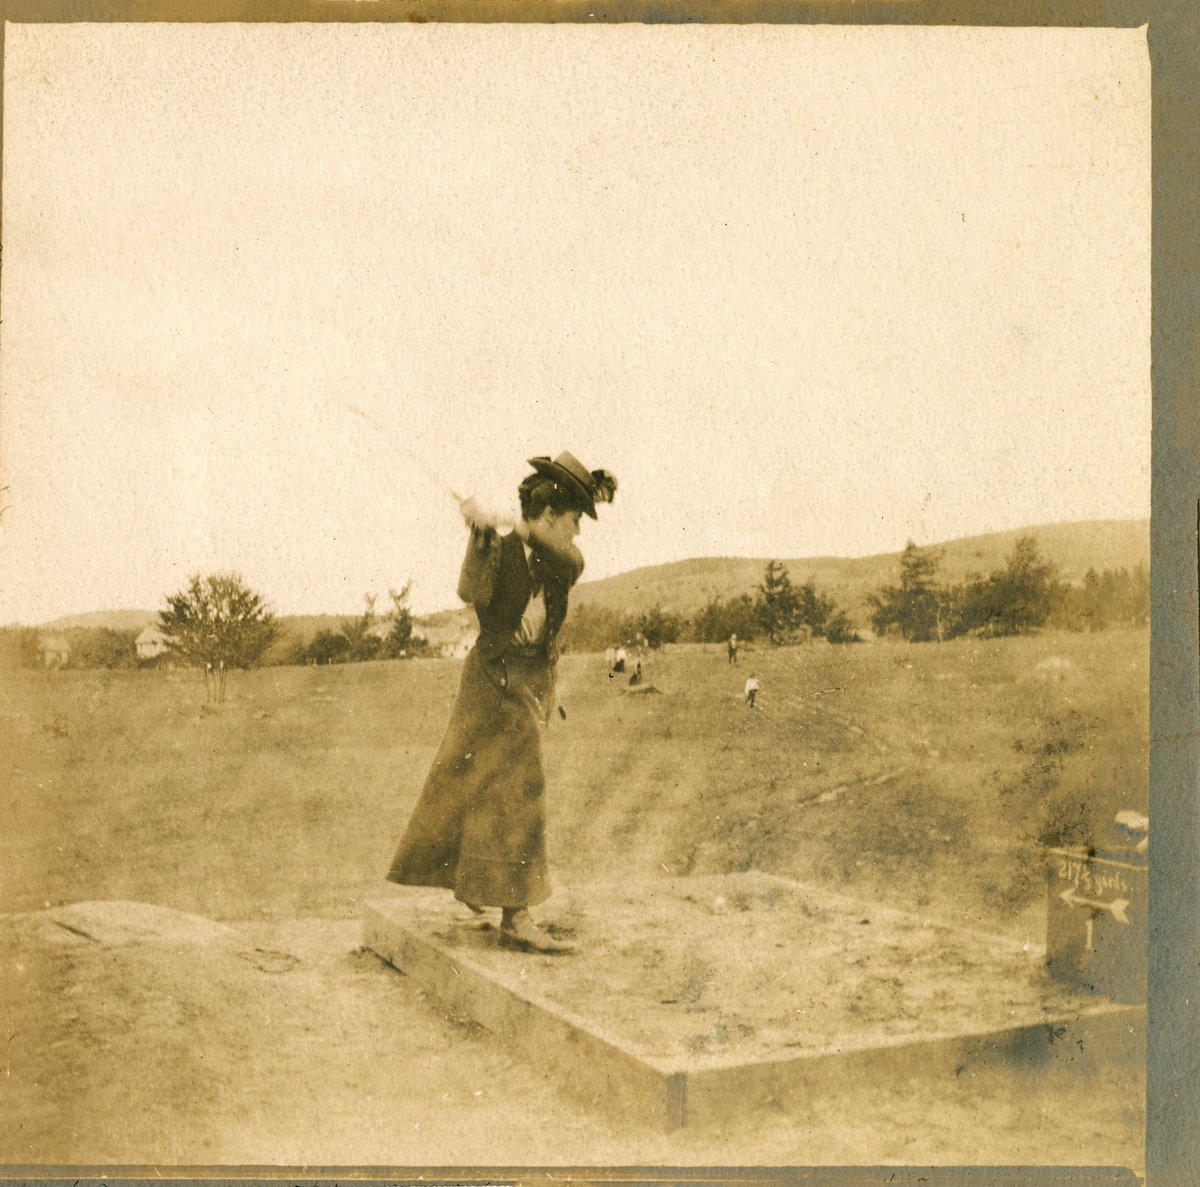 The inaugural #USWomensAmateur was played on Nov. 9, 1895, when Lucy Barnes Brown bested a field of 13 golfers. Now, the Women's Amateur regularly tops 1,300 entries annually. The 2021 championship will be played Aug. 2-8 at Westchester C.C. in Rye, N.Y.